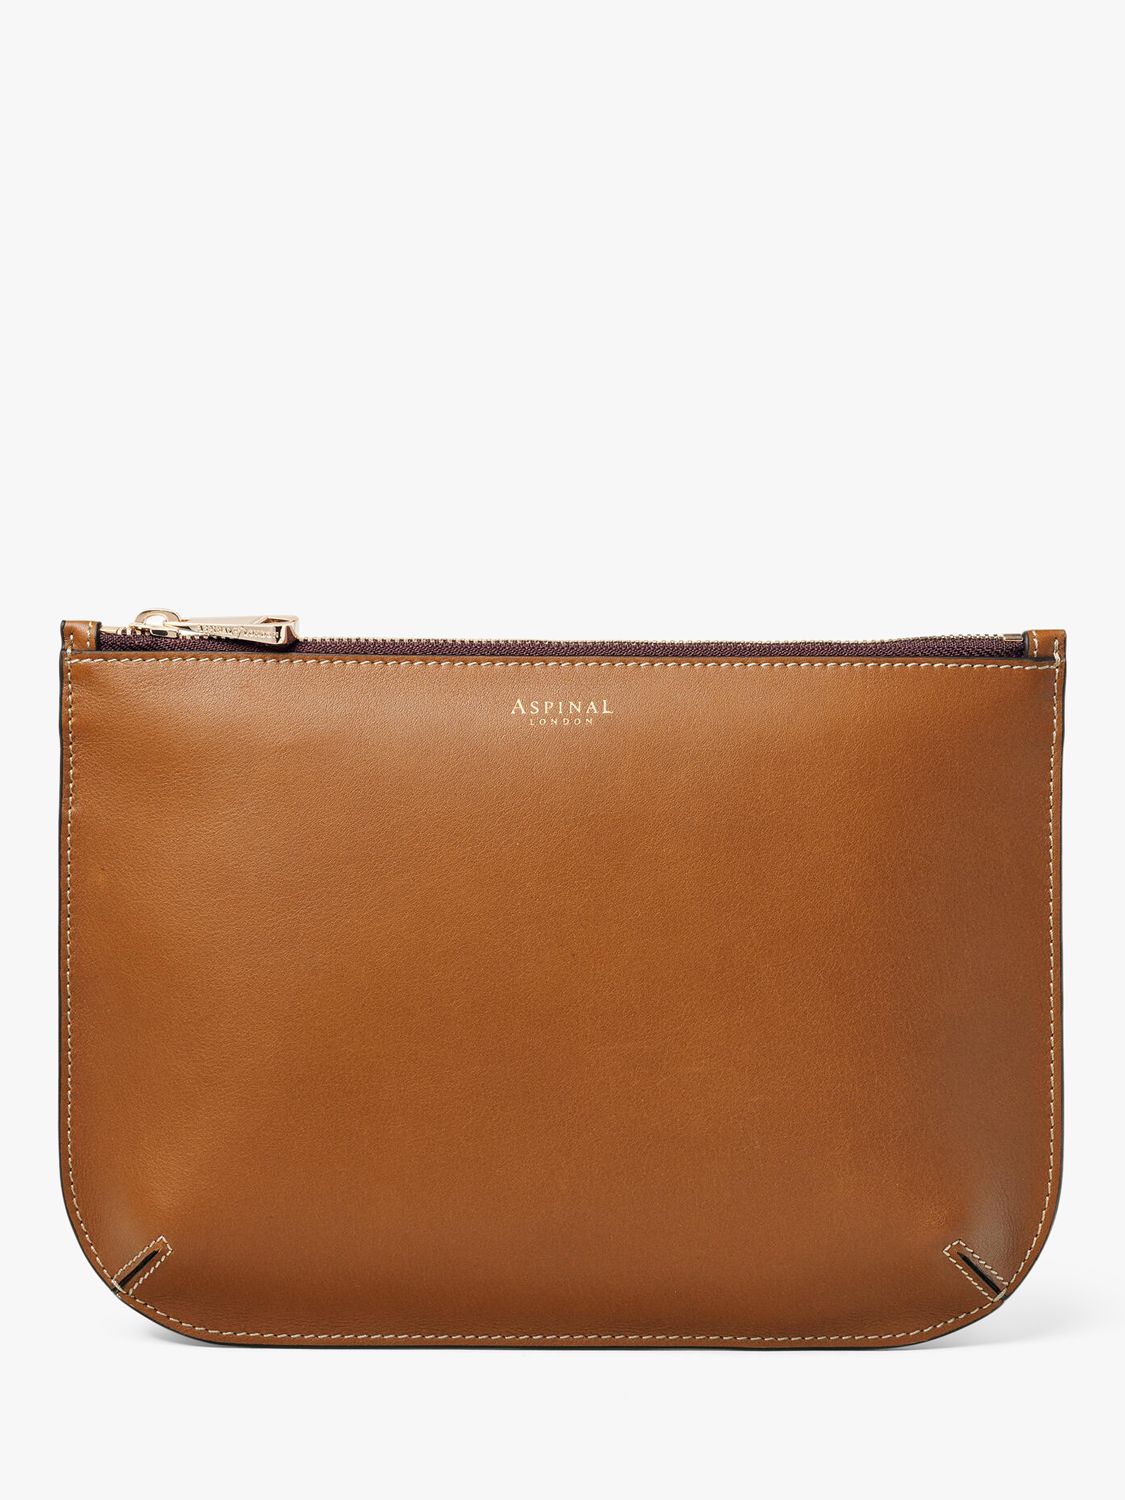 Buy Aspinal of London Large Ella Smooth Leather Pouch Online at johnlewis.com